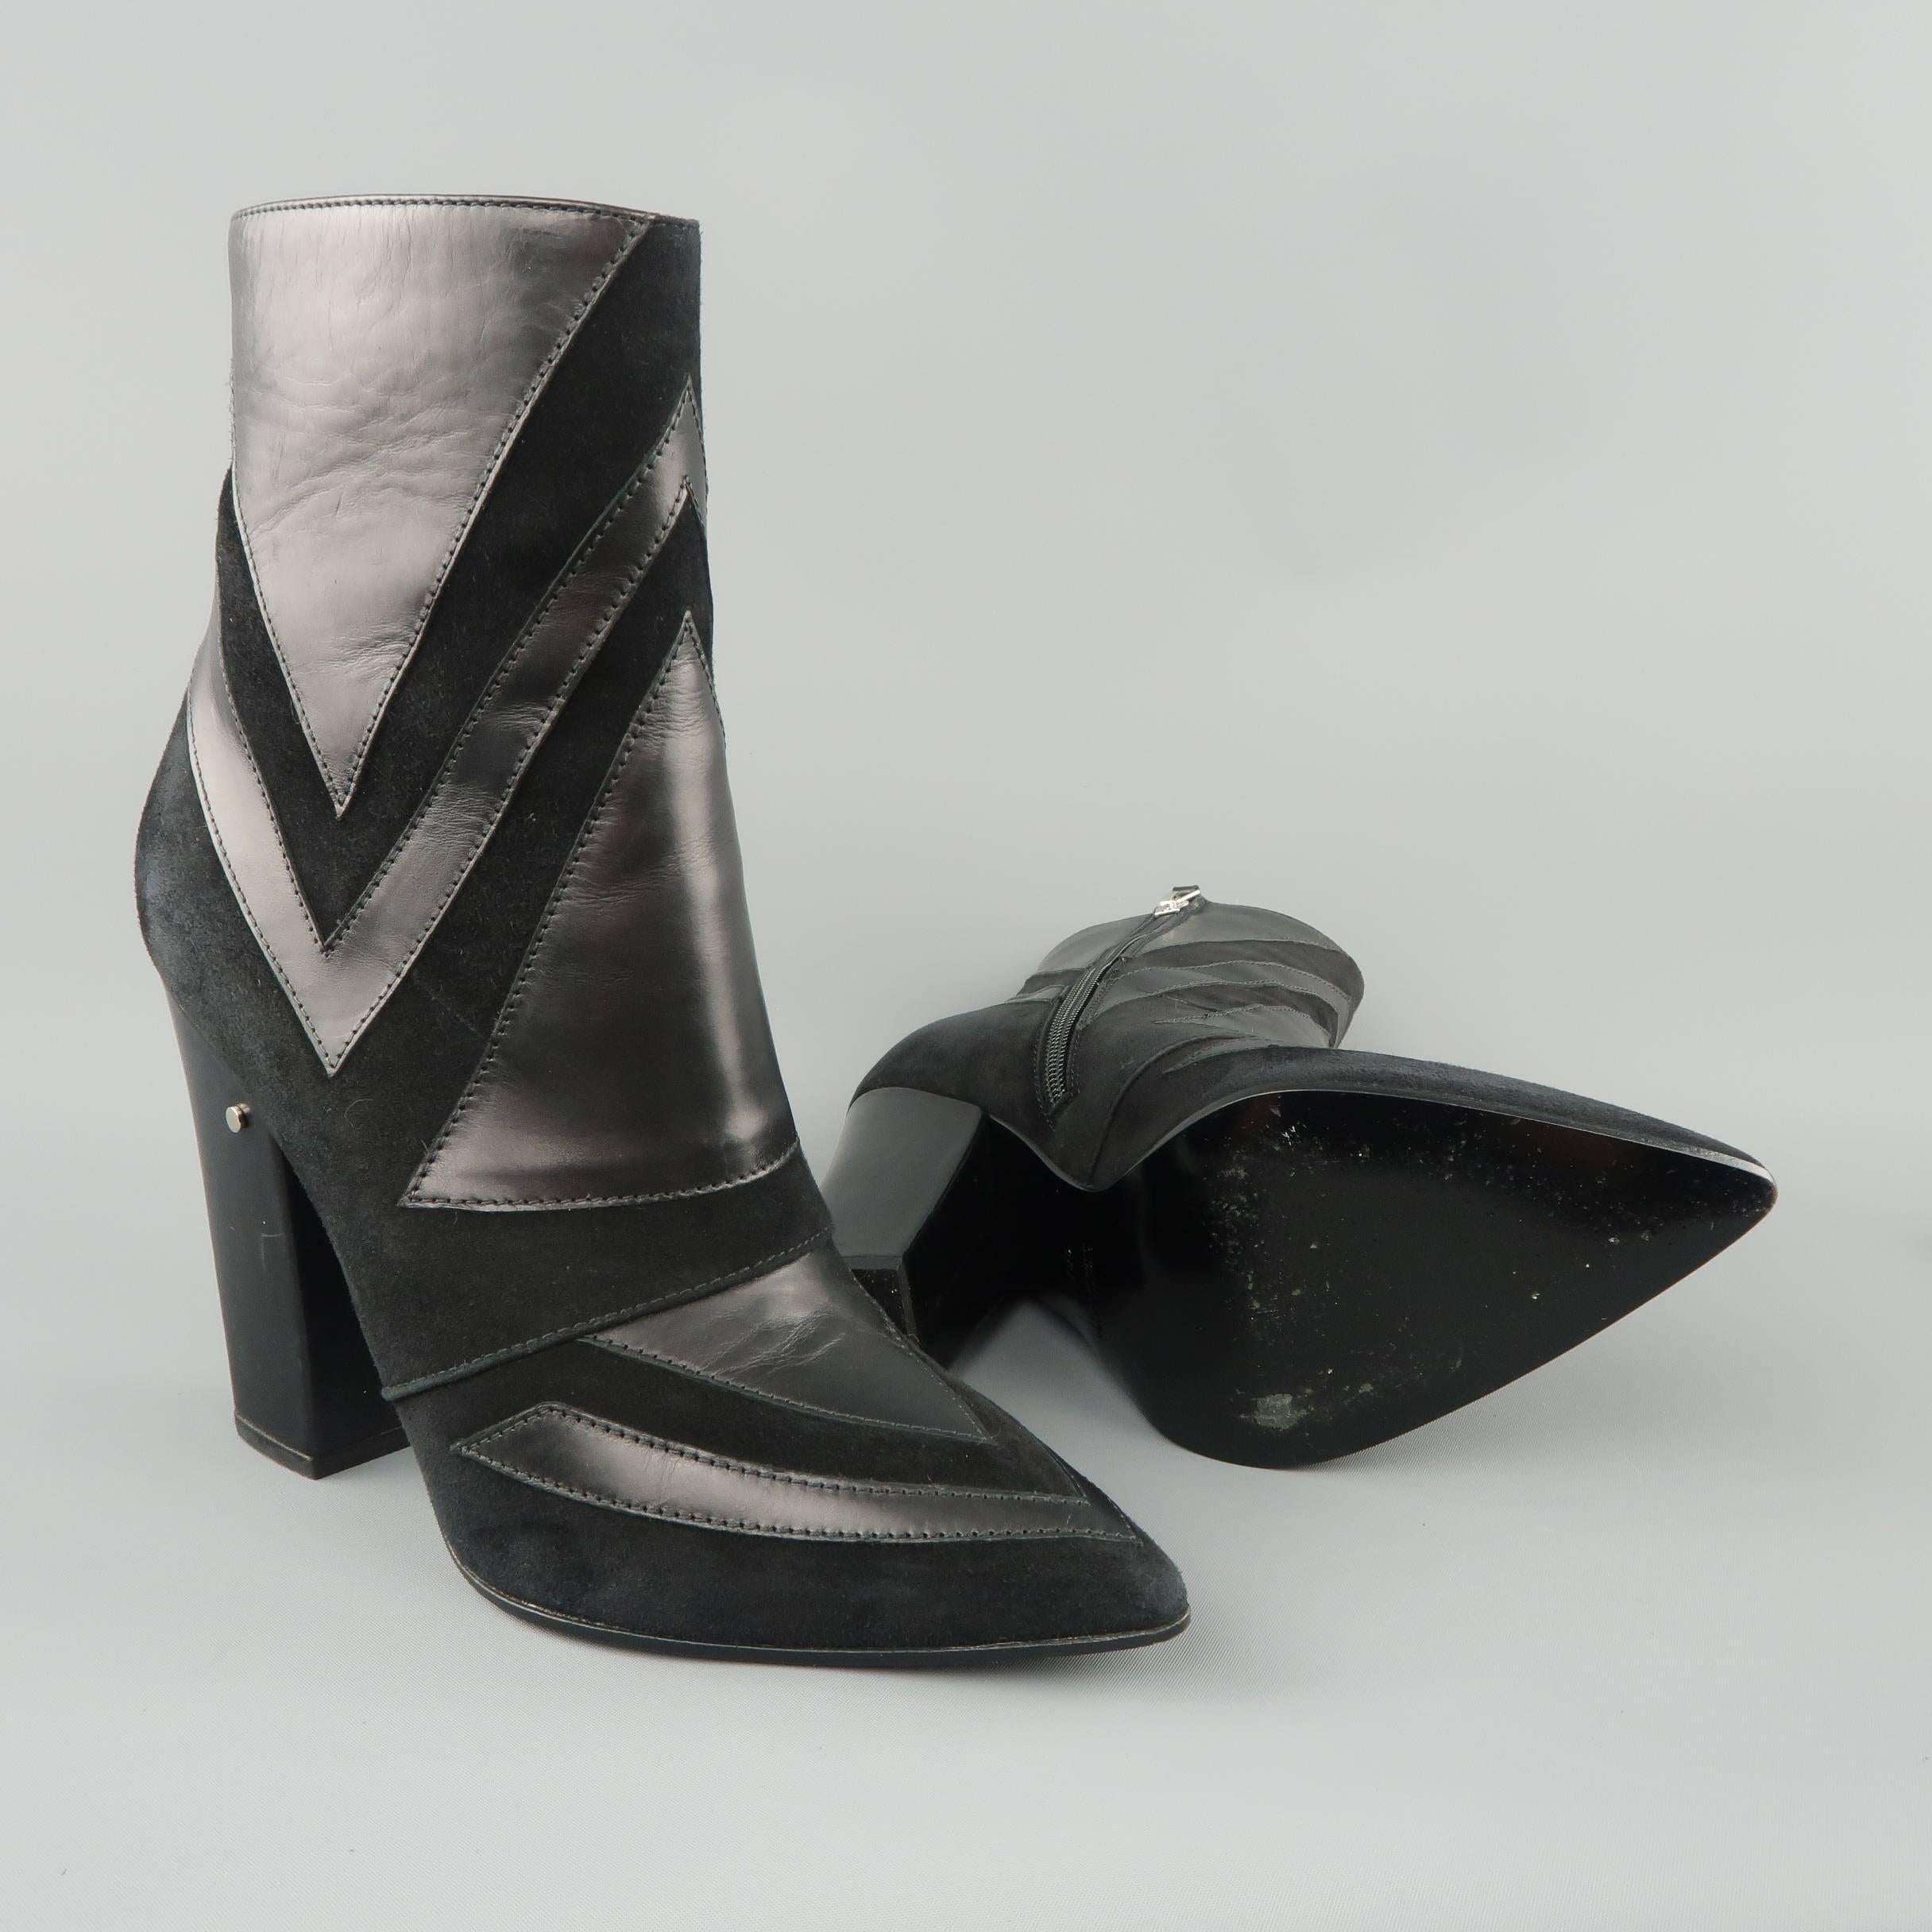 LAURENCE DACADE ankle boots come in black suede with all over black leather geometric patchwork and feature a pointed toe, inner zip closure, and chunky covered heel. Made in Italy.
 
Good Pre-Owned Condition.
Marked: IT 38.5
 
Measurements:
 
Heel: